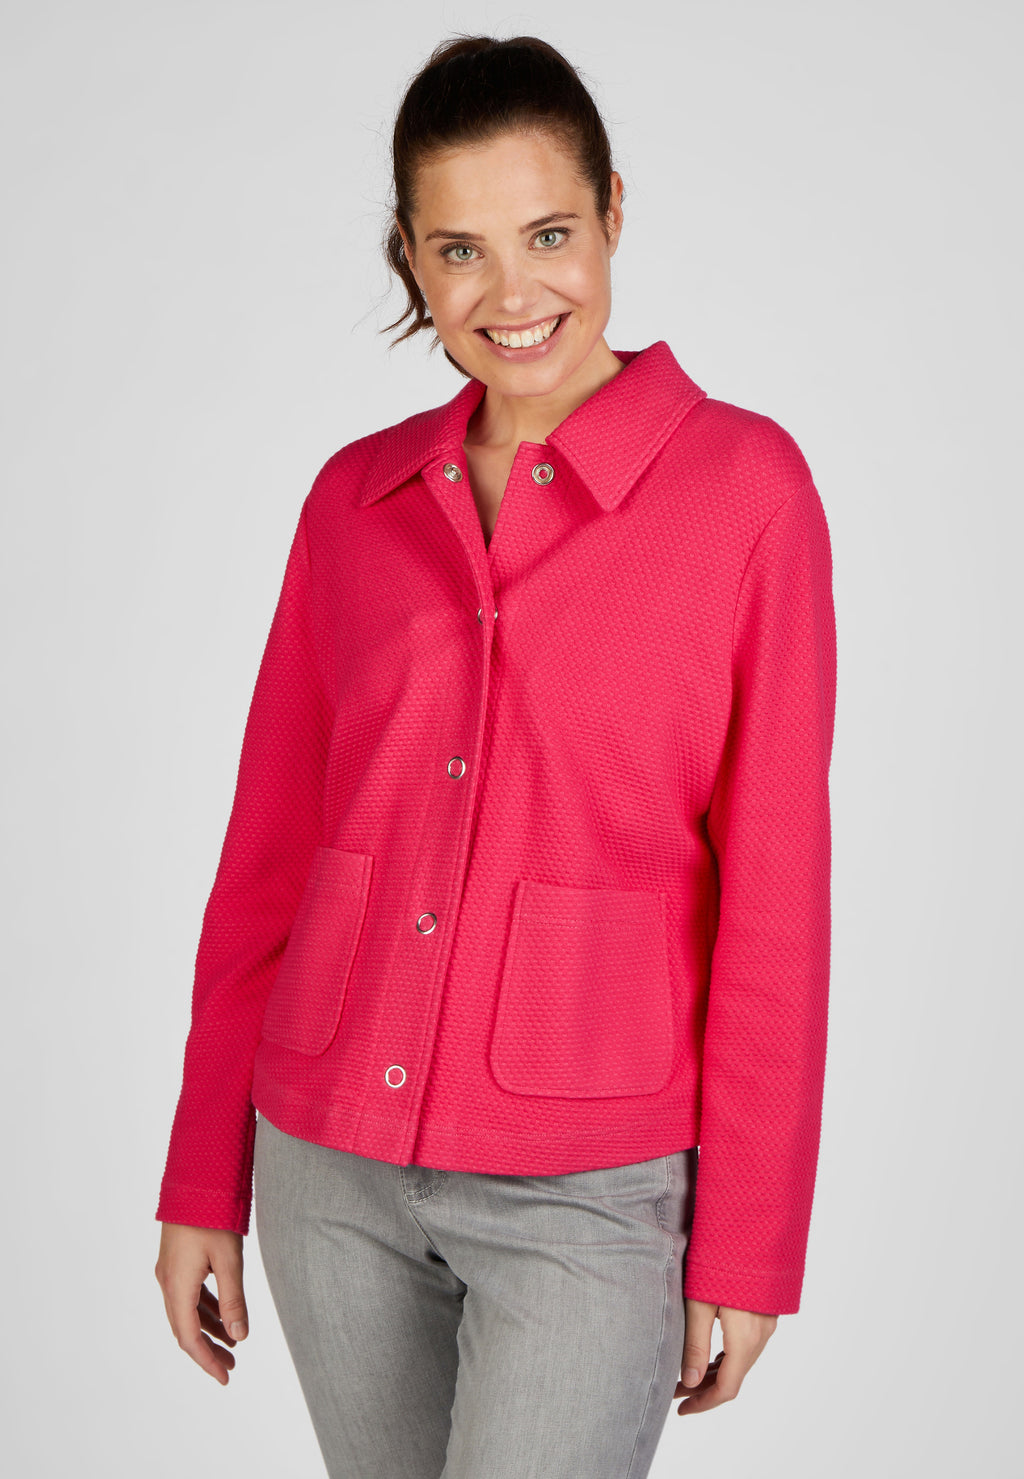 Rabe magnolia park collection button up textured jacket with pocket details and collar in pink, product code 52-113221